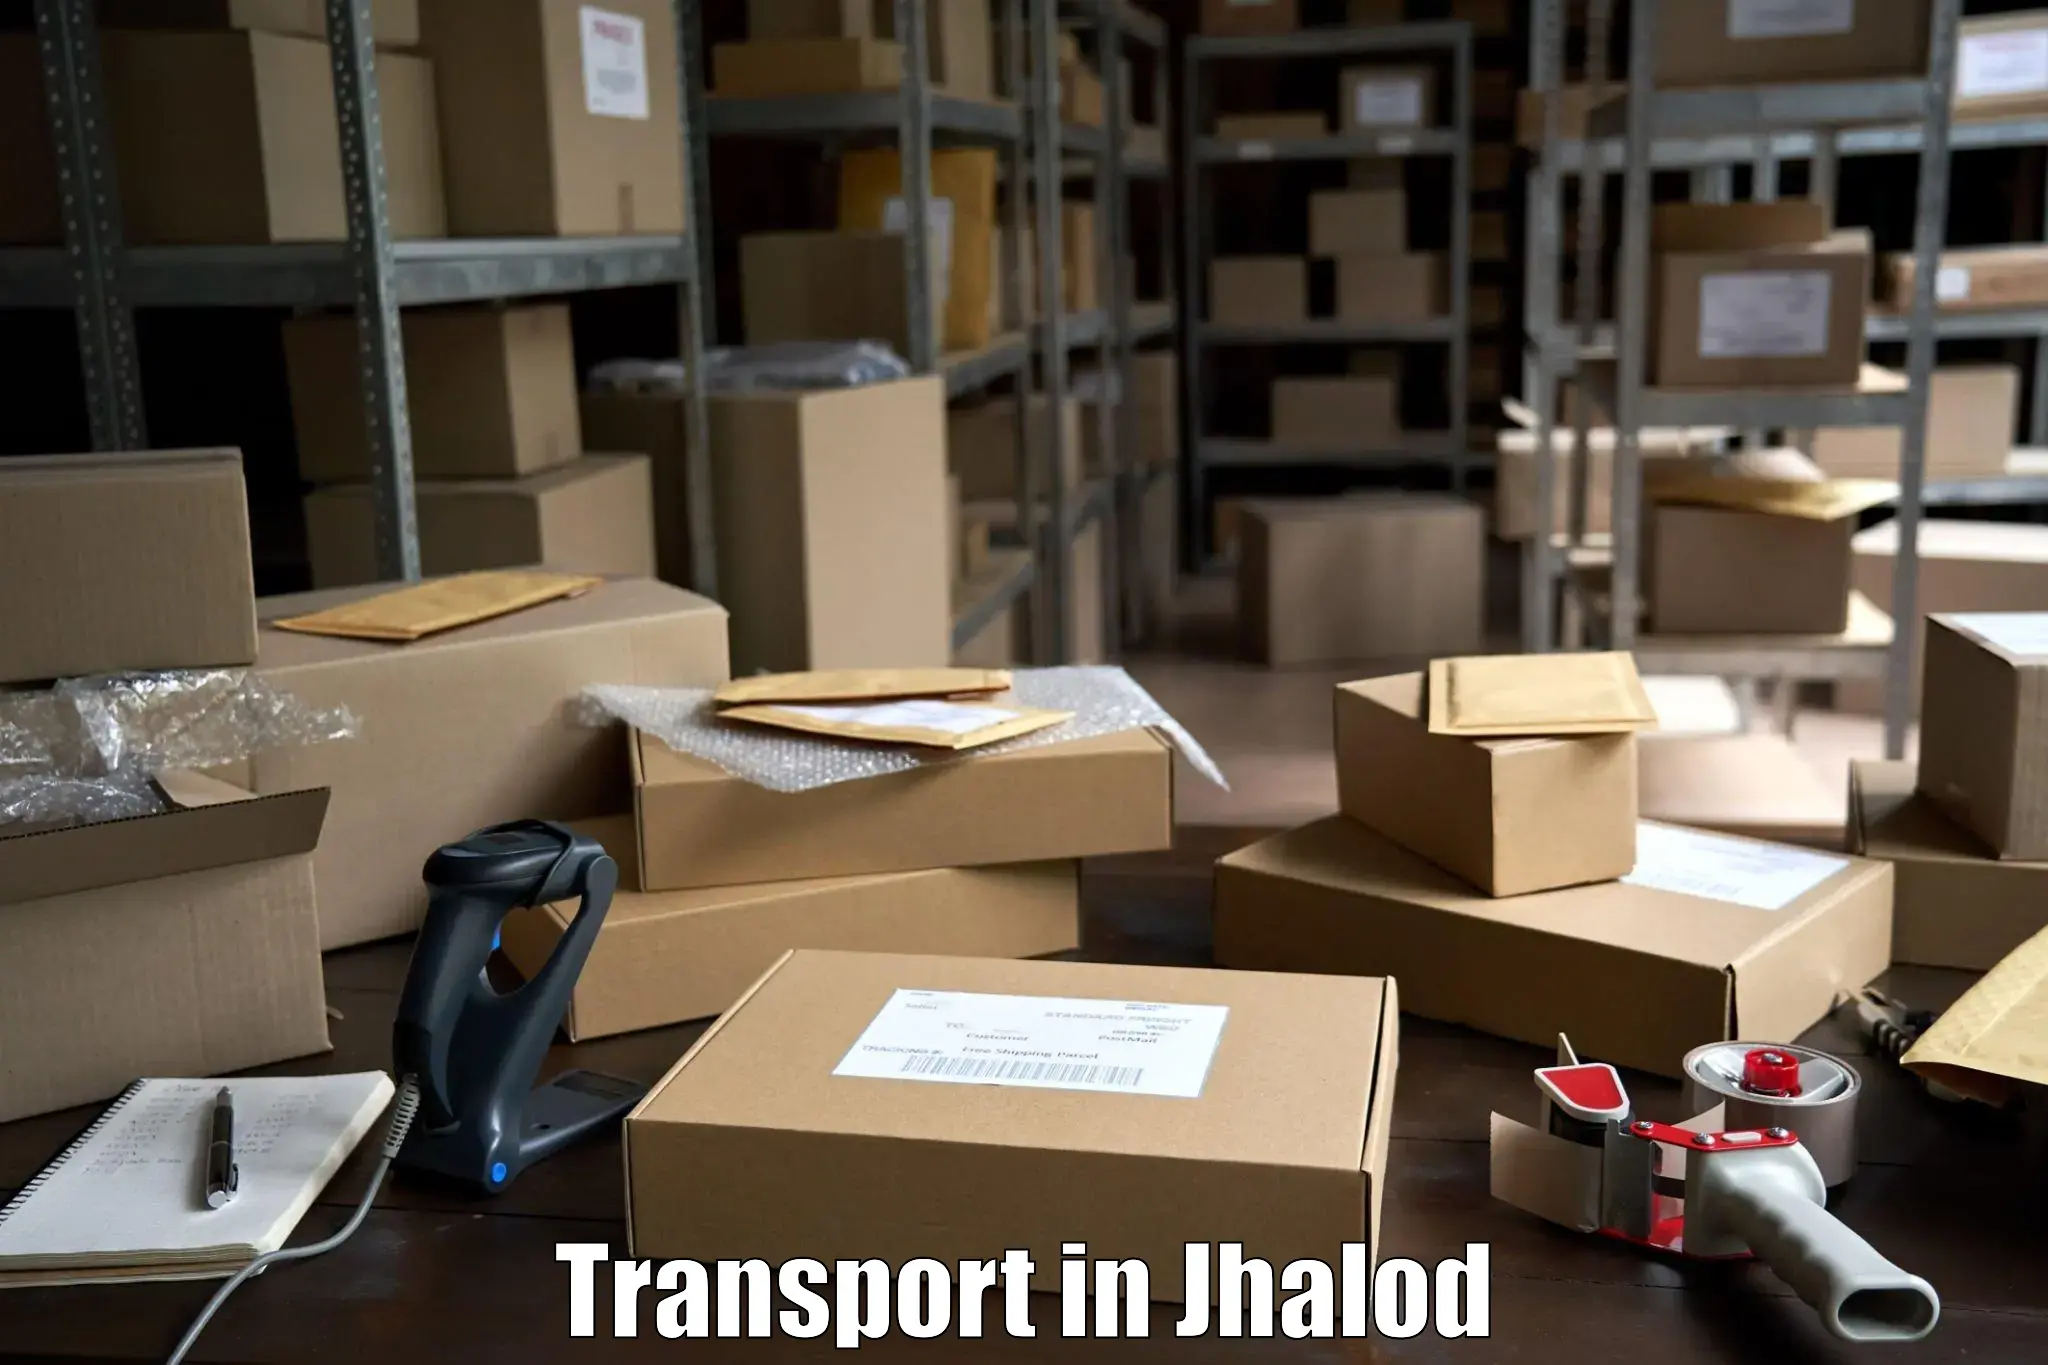 Online transport booking in Jhalod